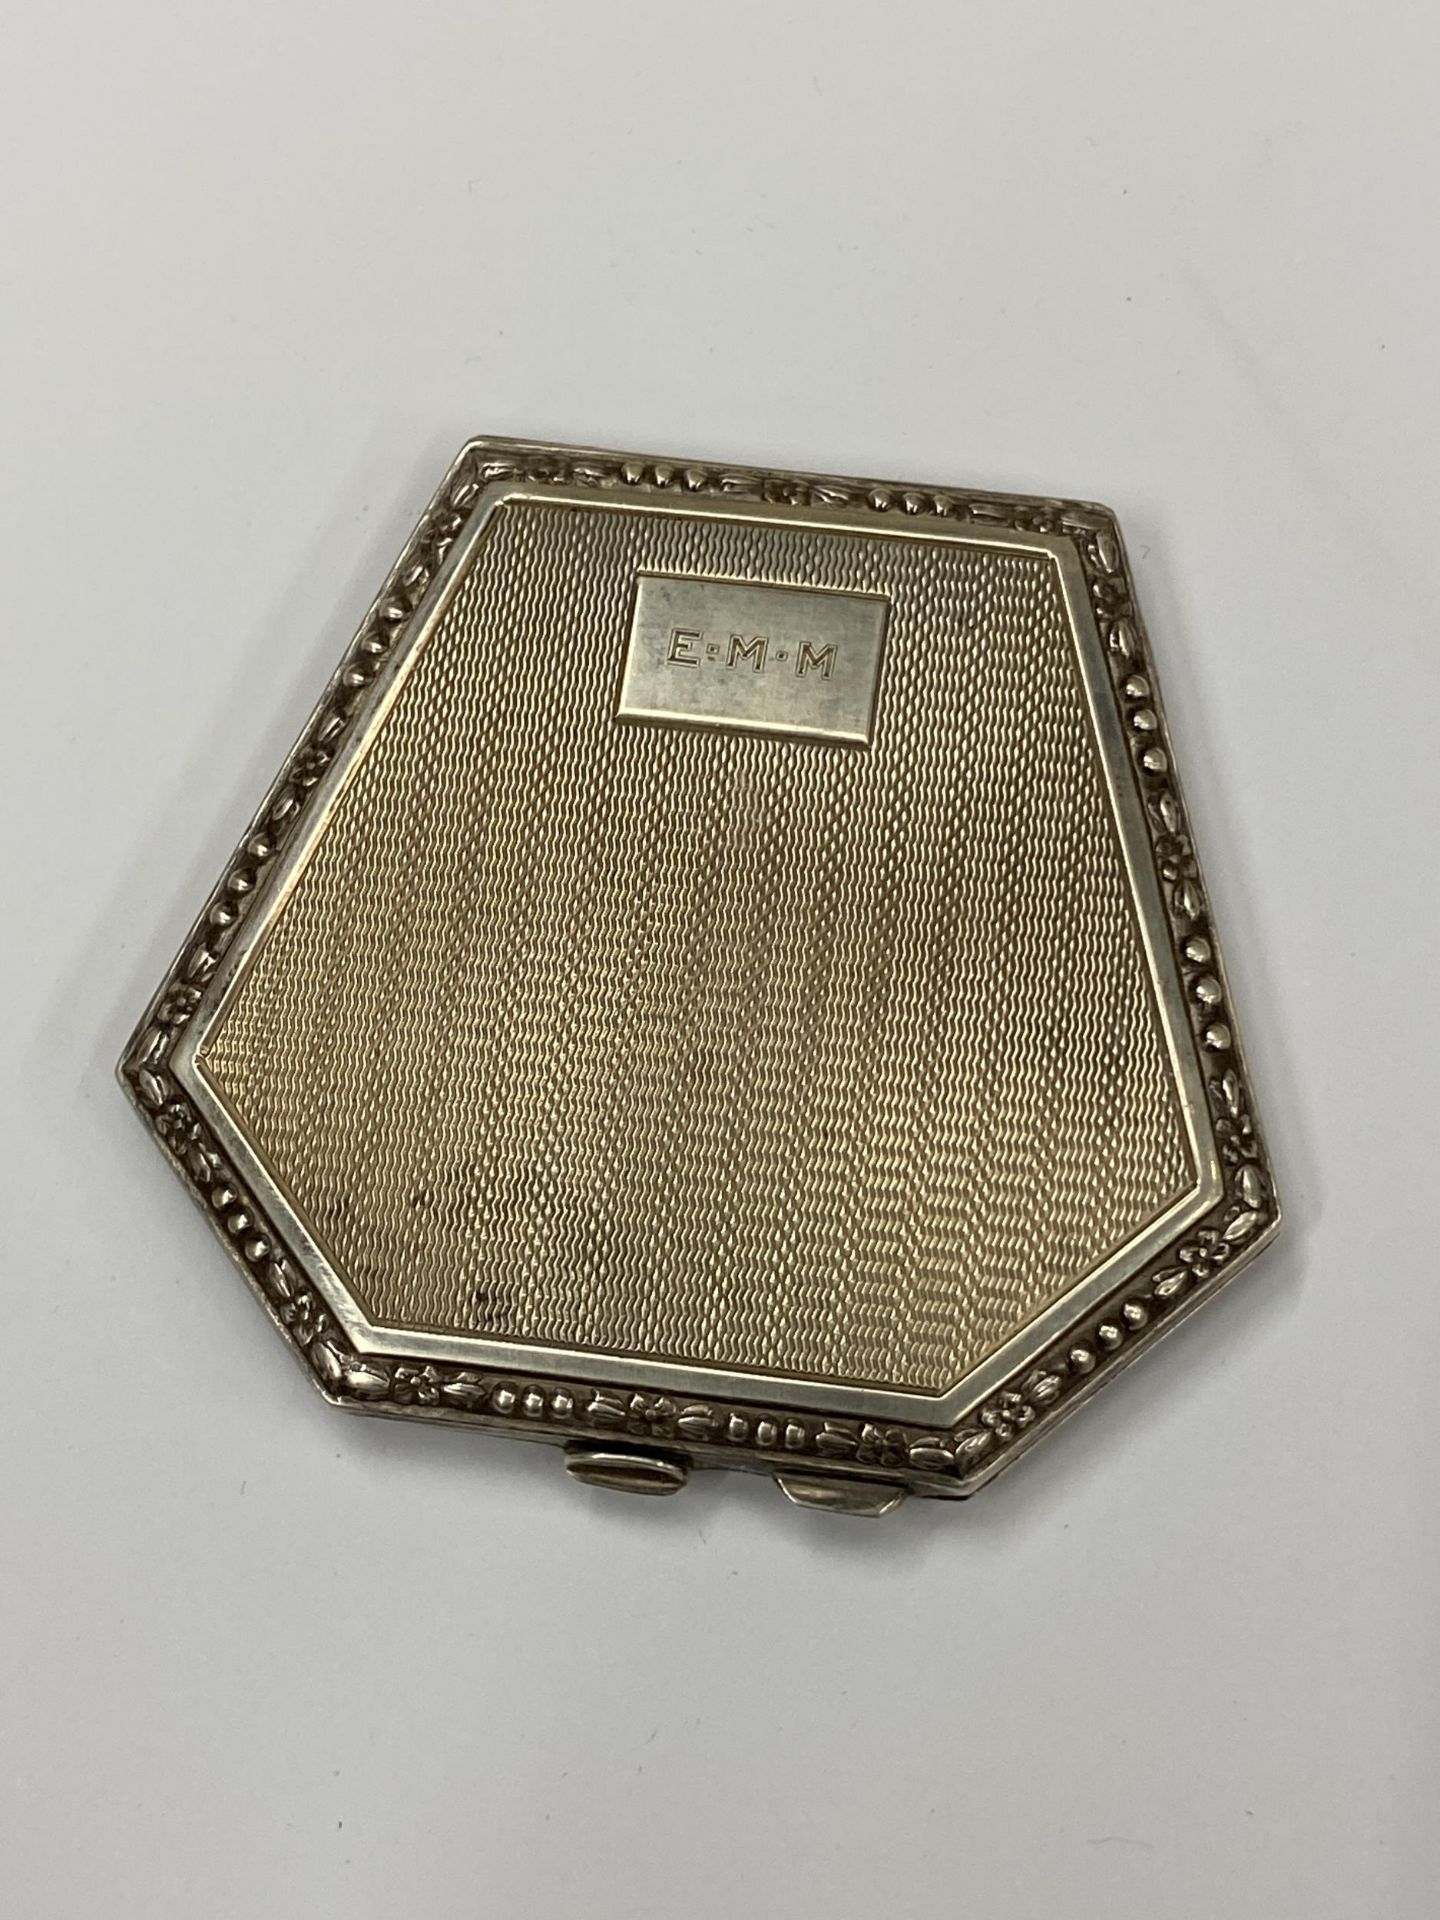 A HALLMARKED SILVER LADIES COMPACT